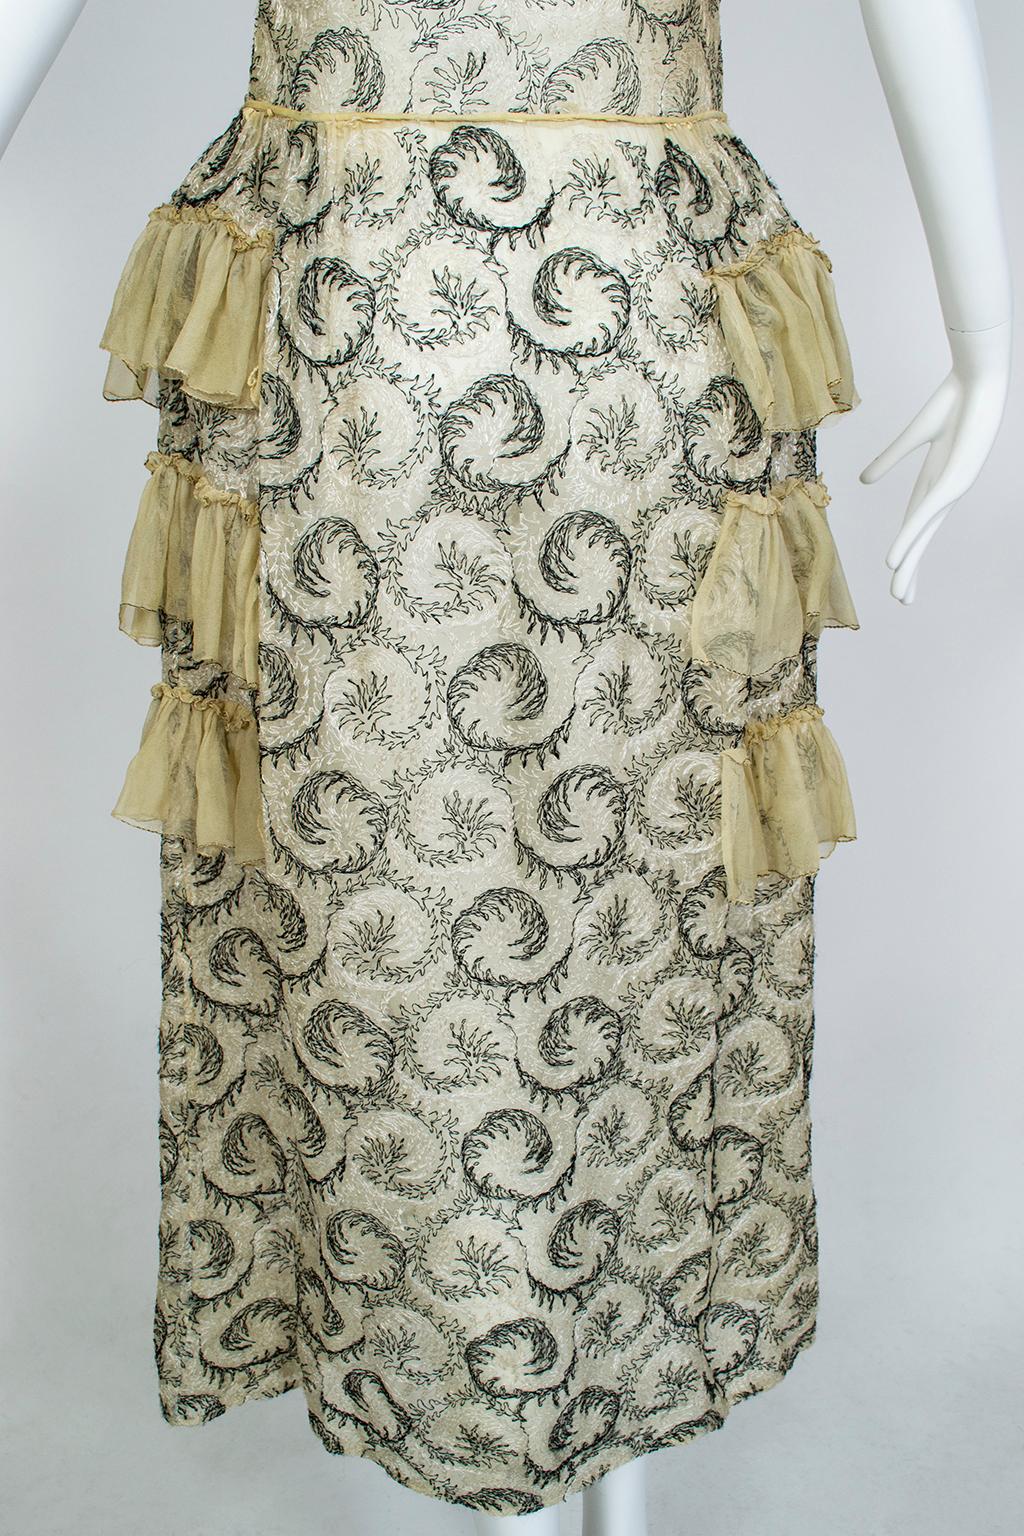 Women's Chartreuse Edwardian Chiffon Robe de Style with Scrolling Embroidery - XS, 1910s For Sale